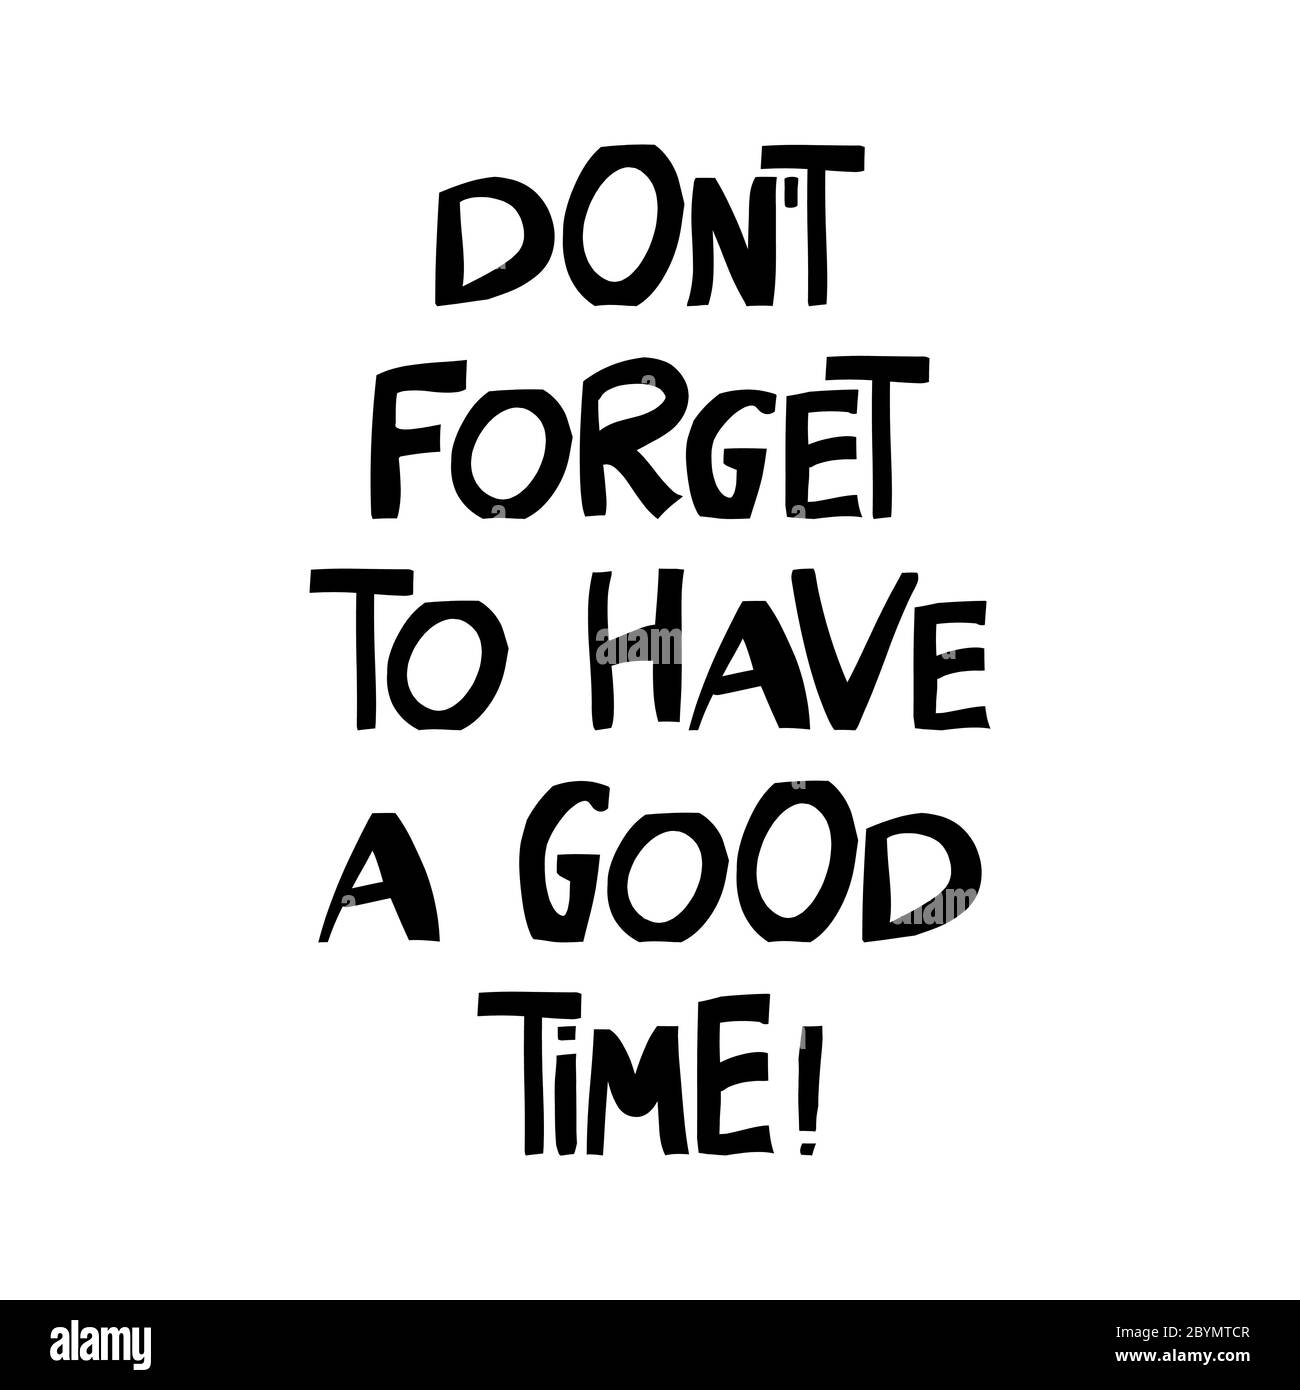 Do not forget to have a good time. Motivation quote. Cute hand drawn lettering in modern scandinavian style. Isolated on white background. Vector Stock Vector